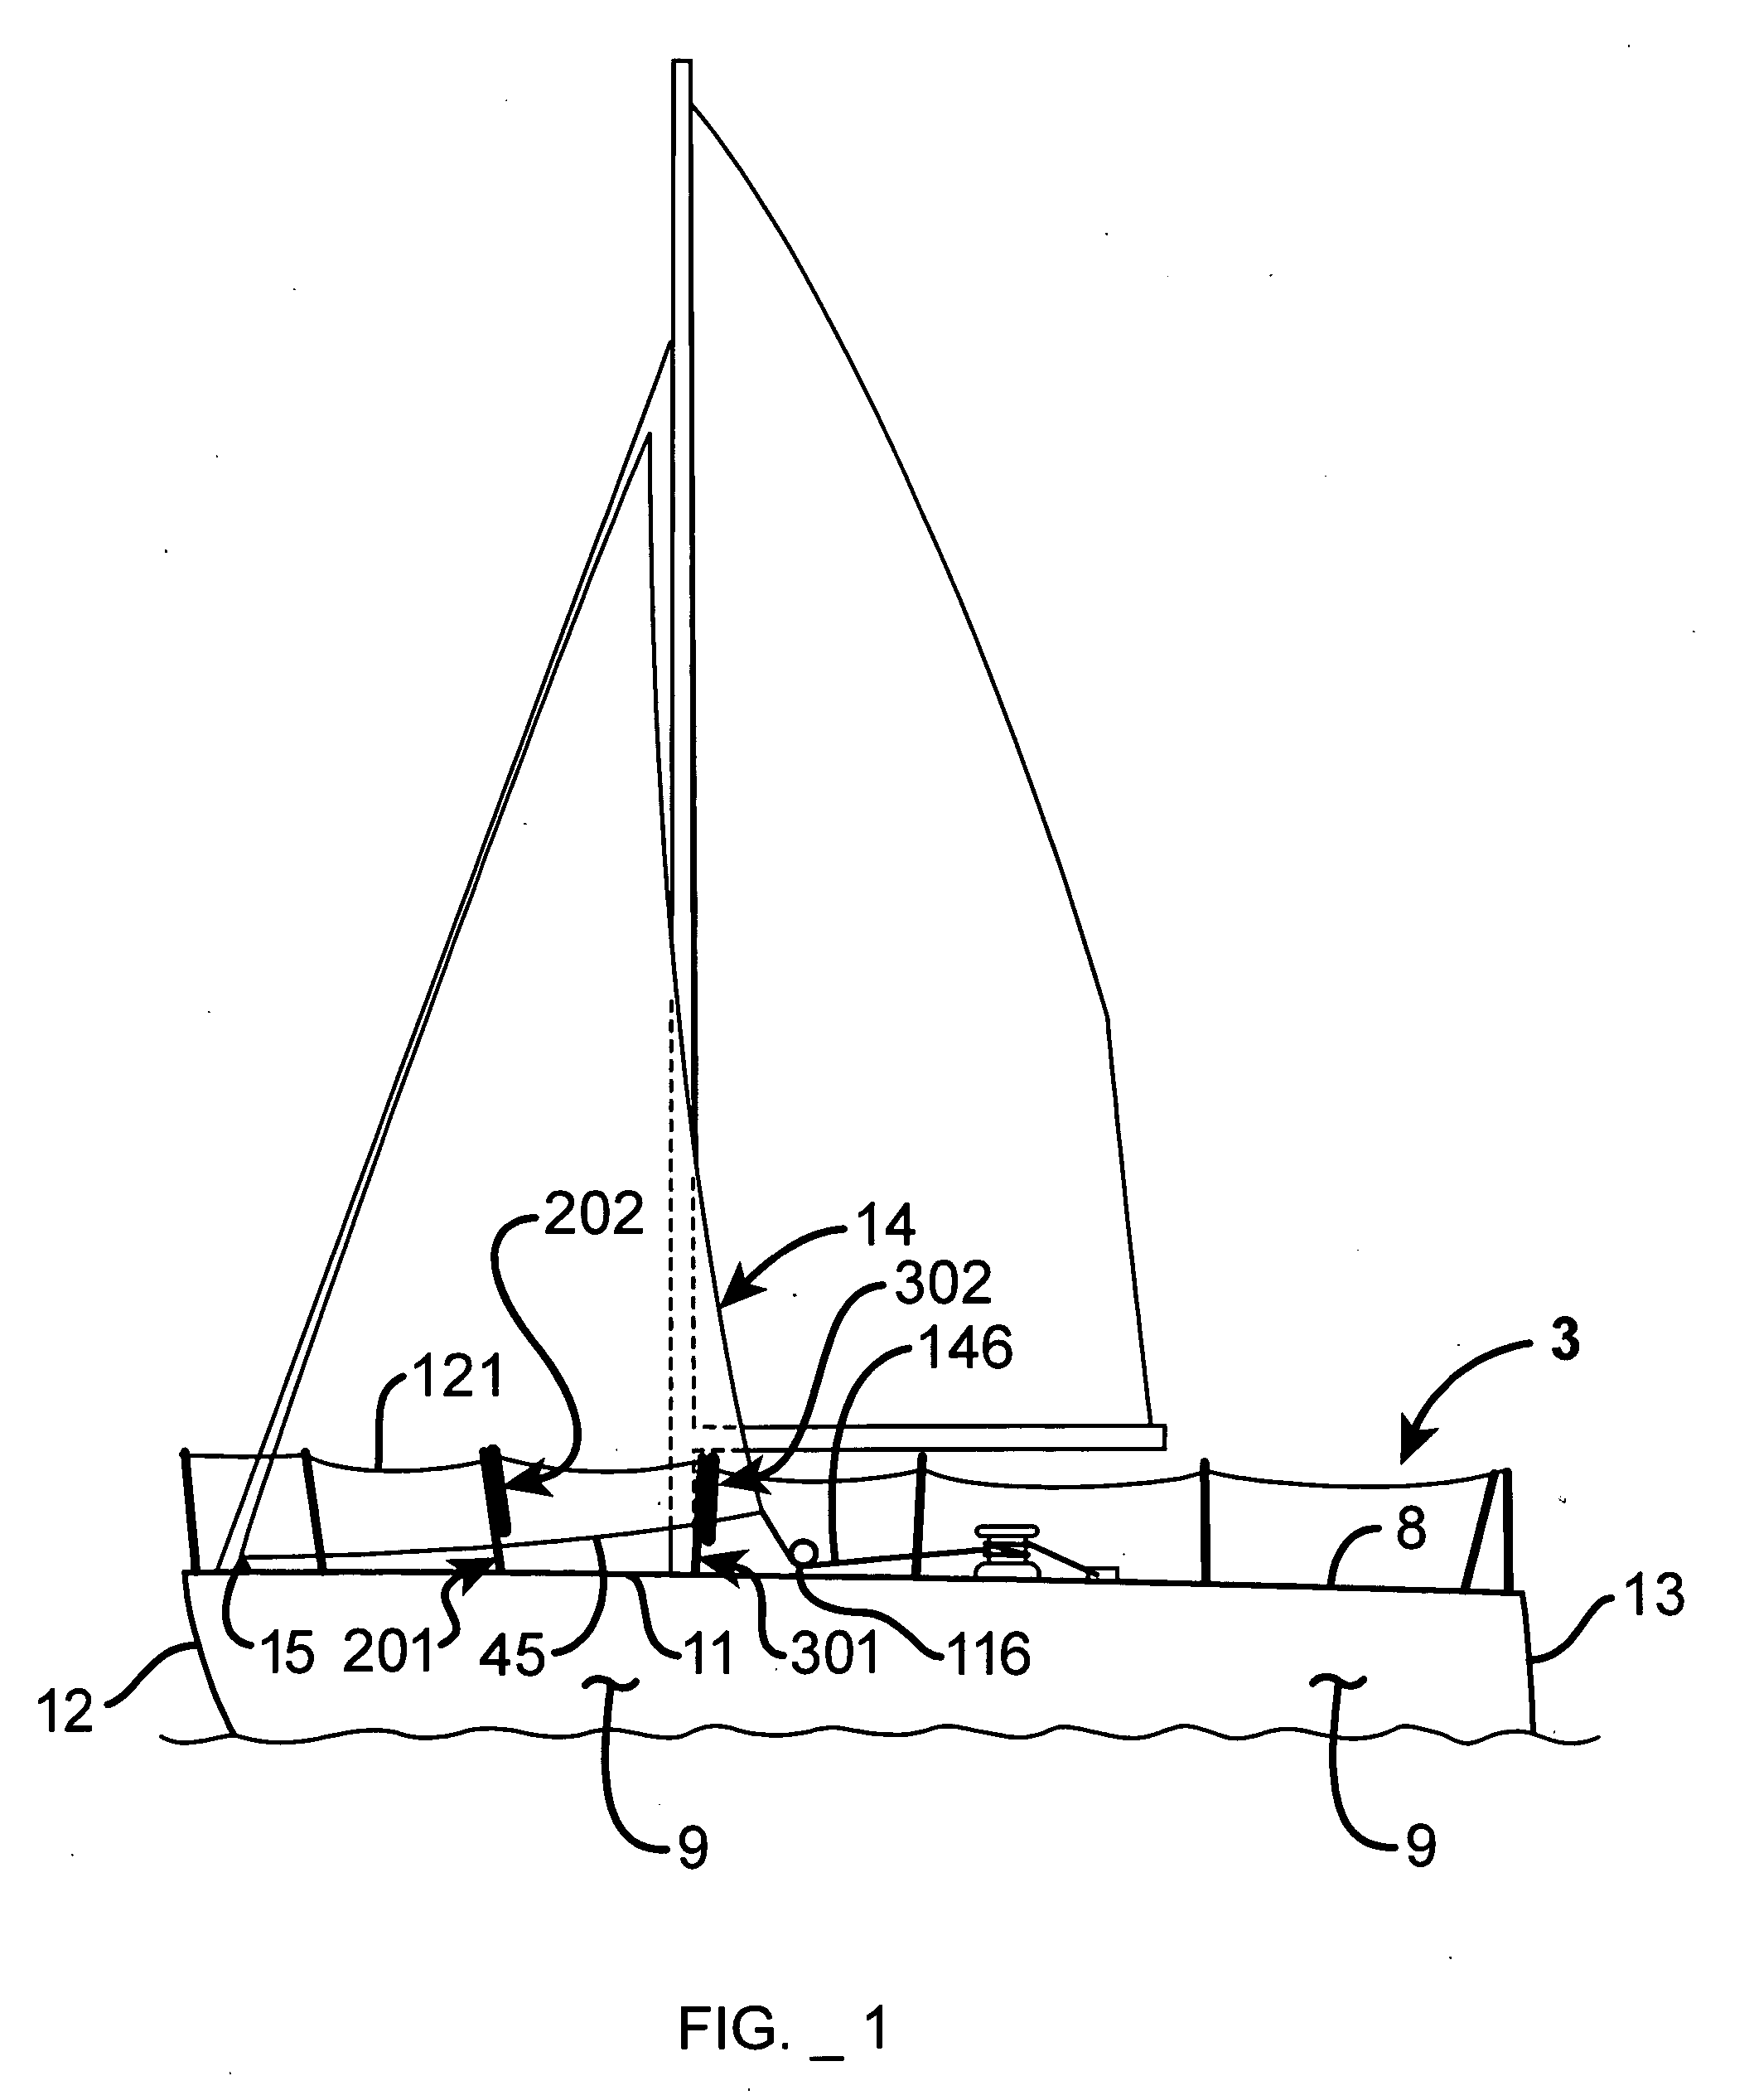 Guide for assisting sails over stanchions